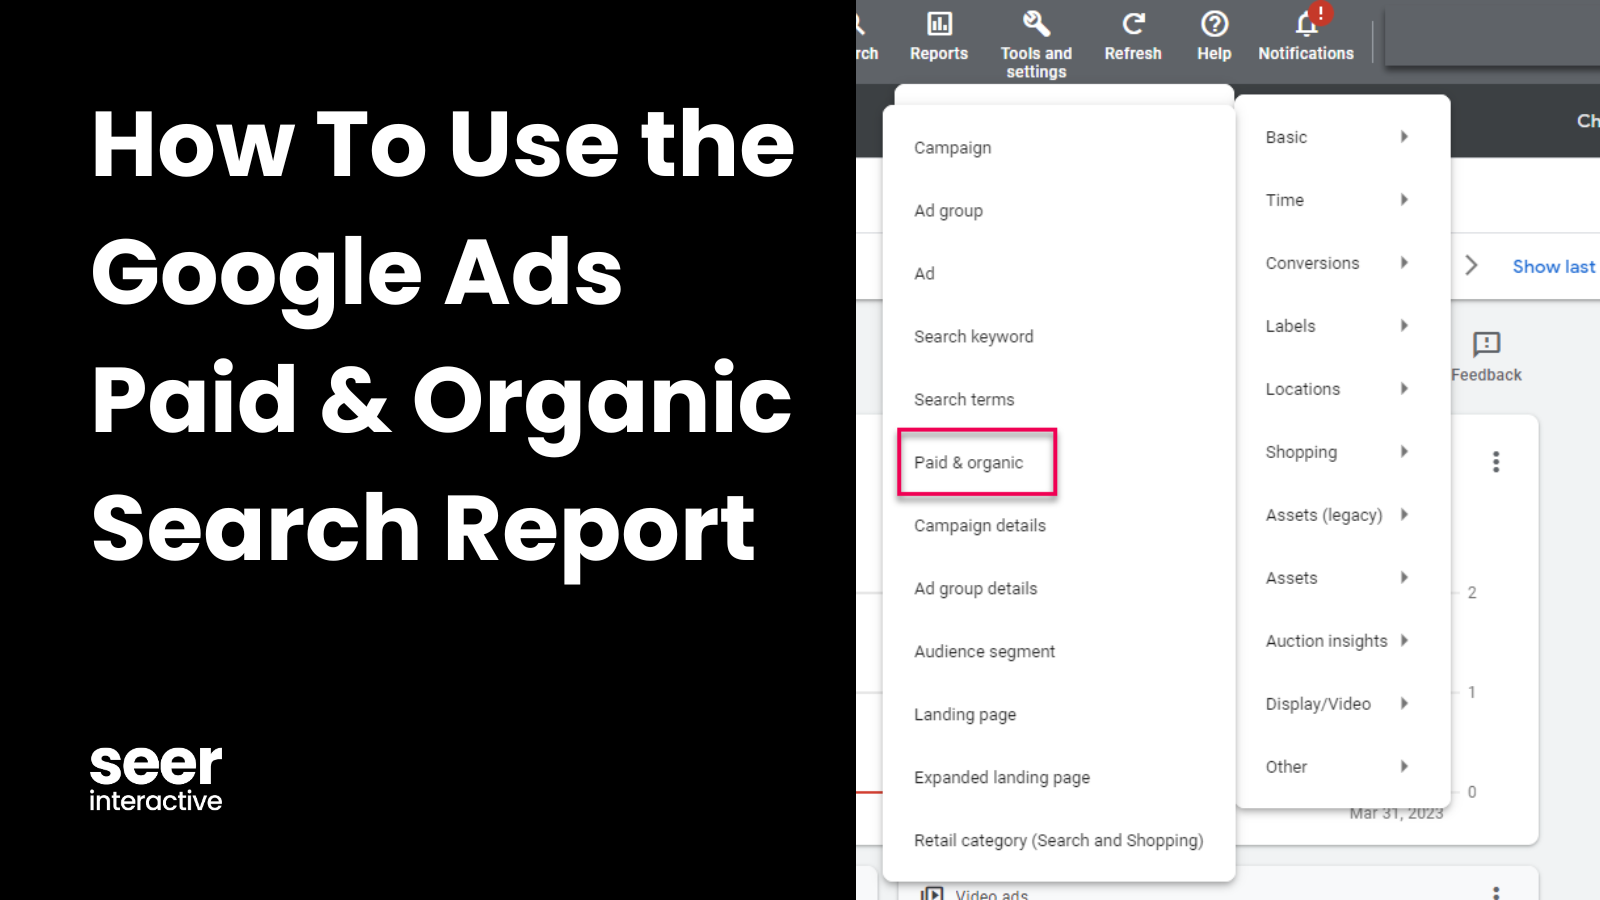 How To Use the Google Ads Paid & Organic Search Report